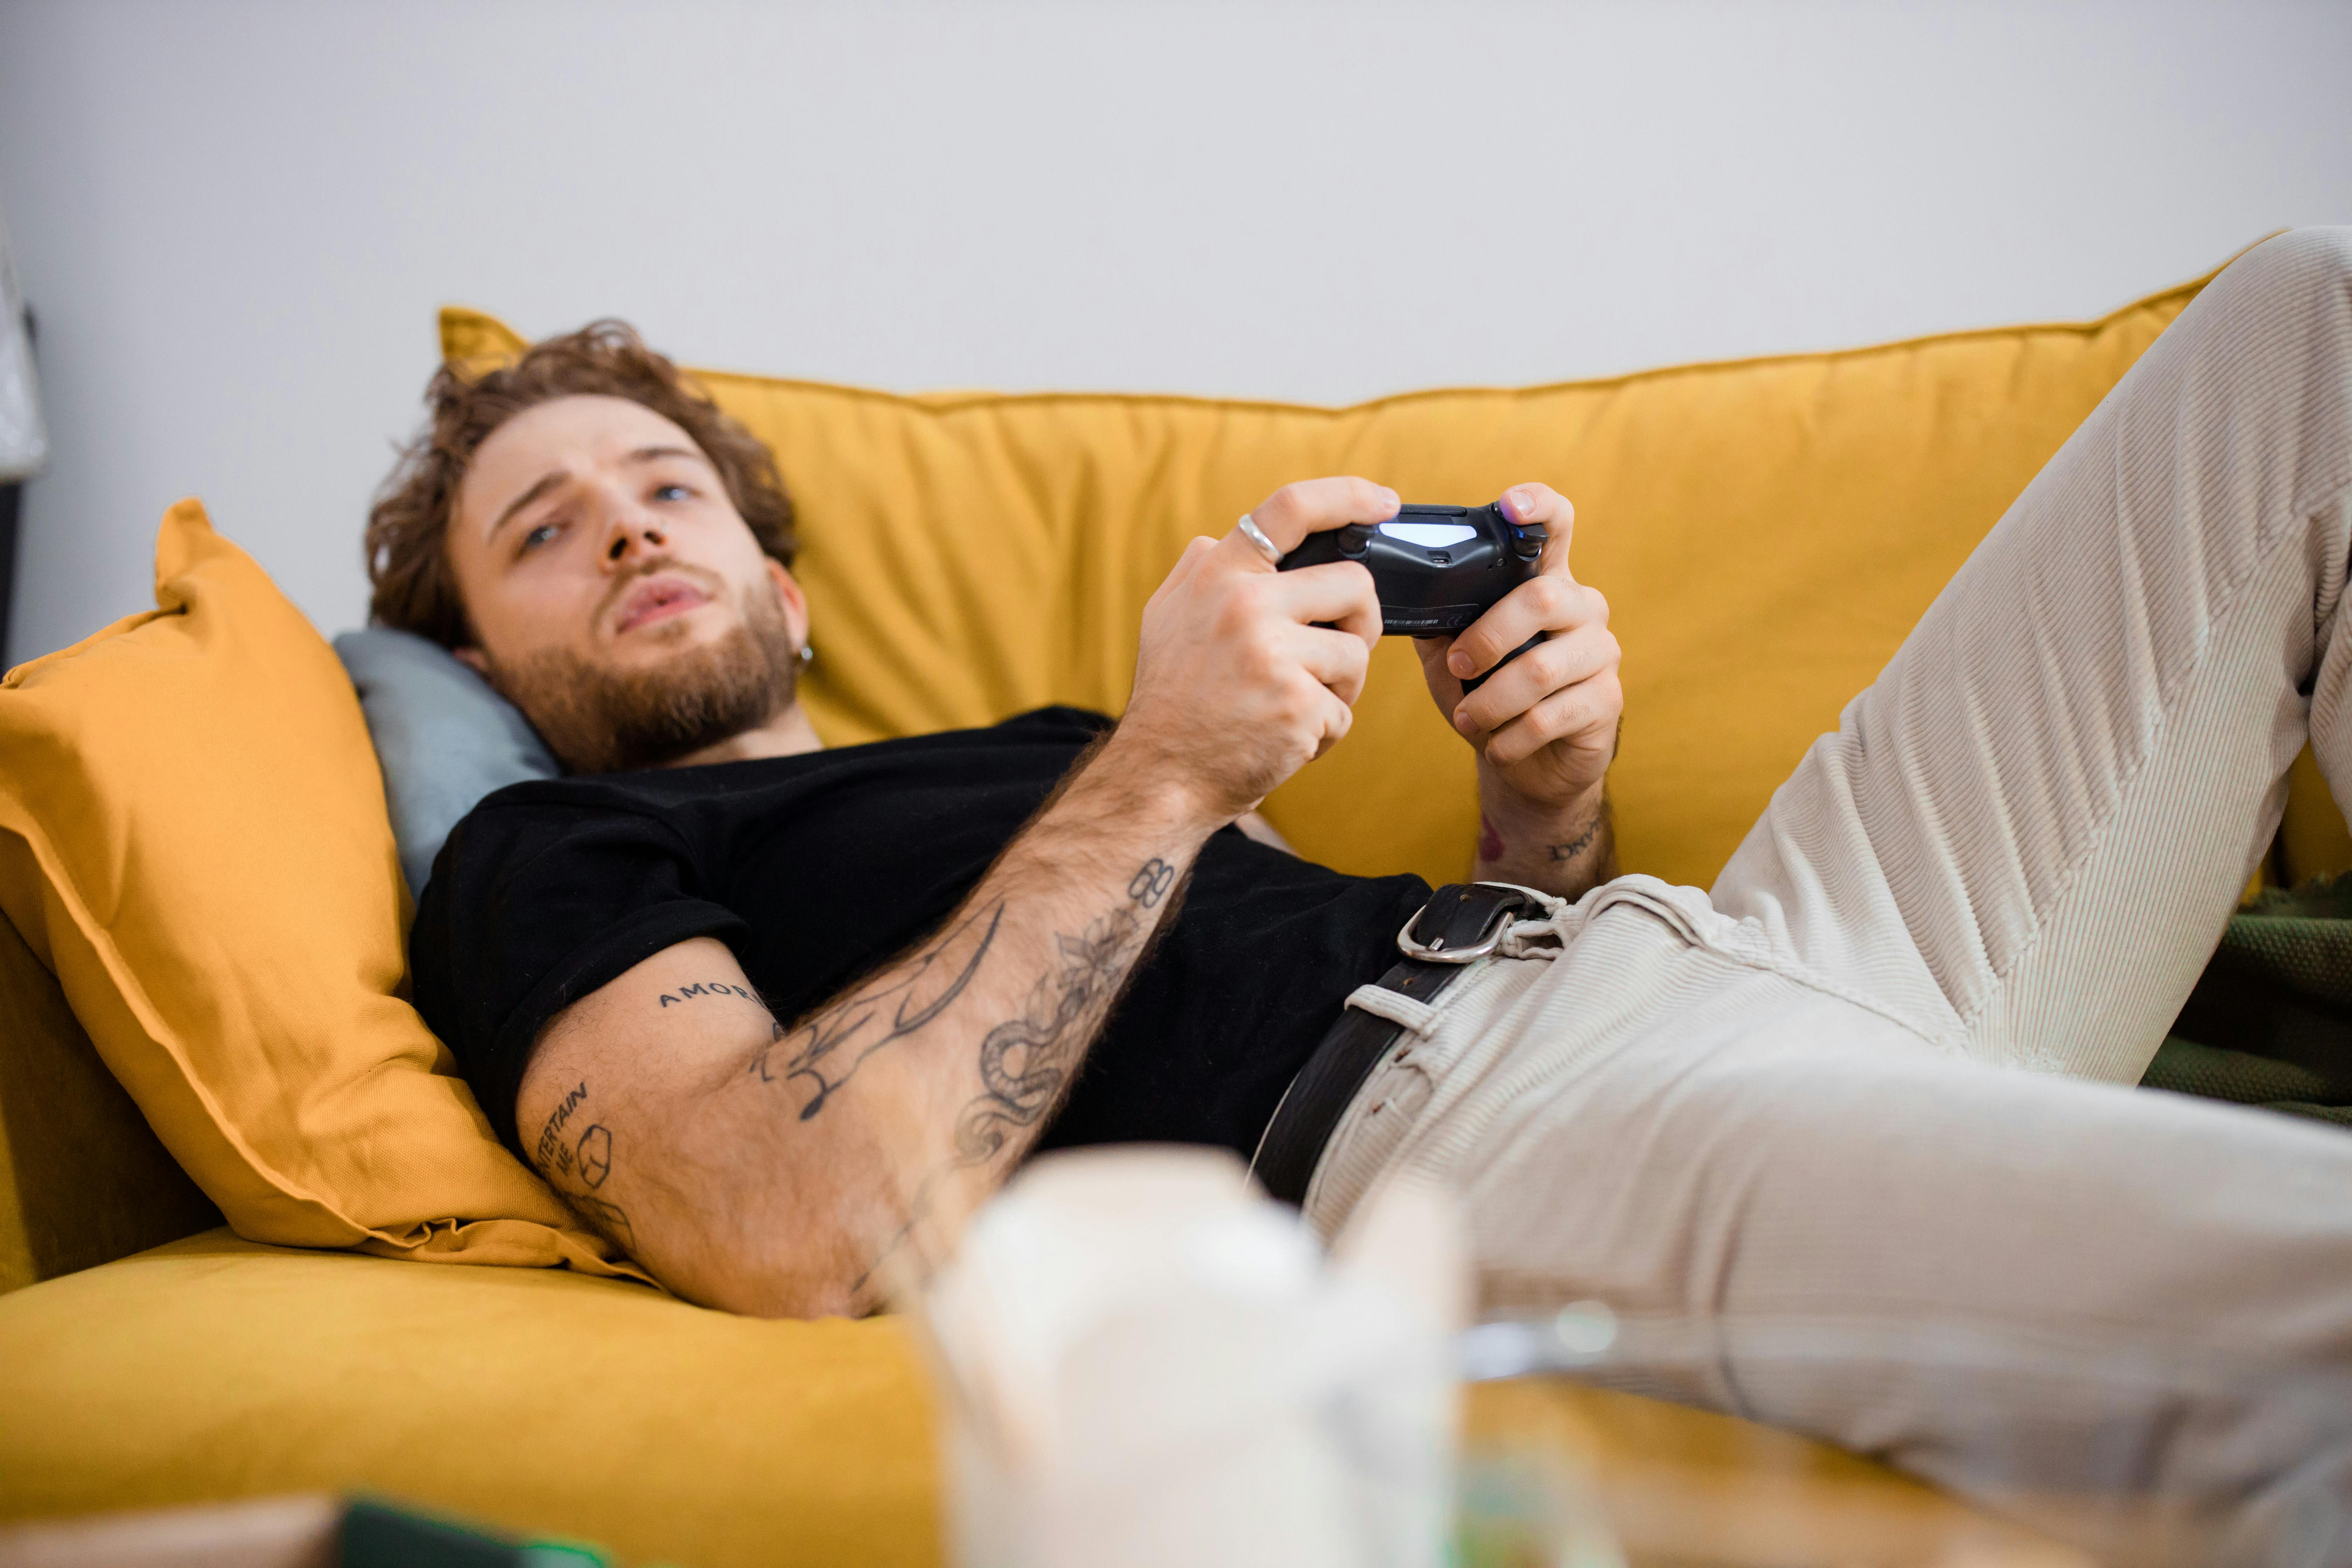 A man playing a television game while lying on a couch | Source: Pexels